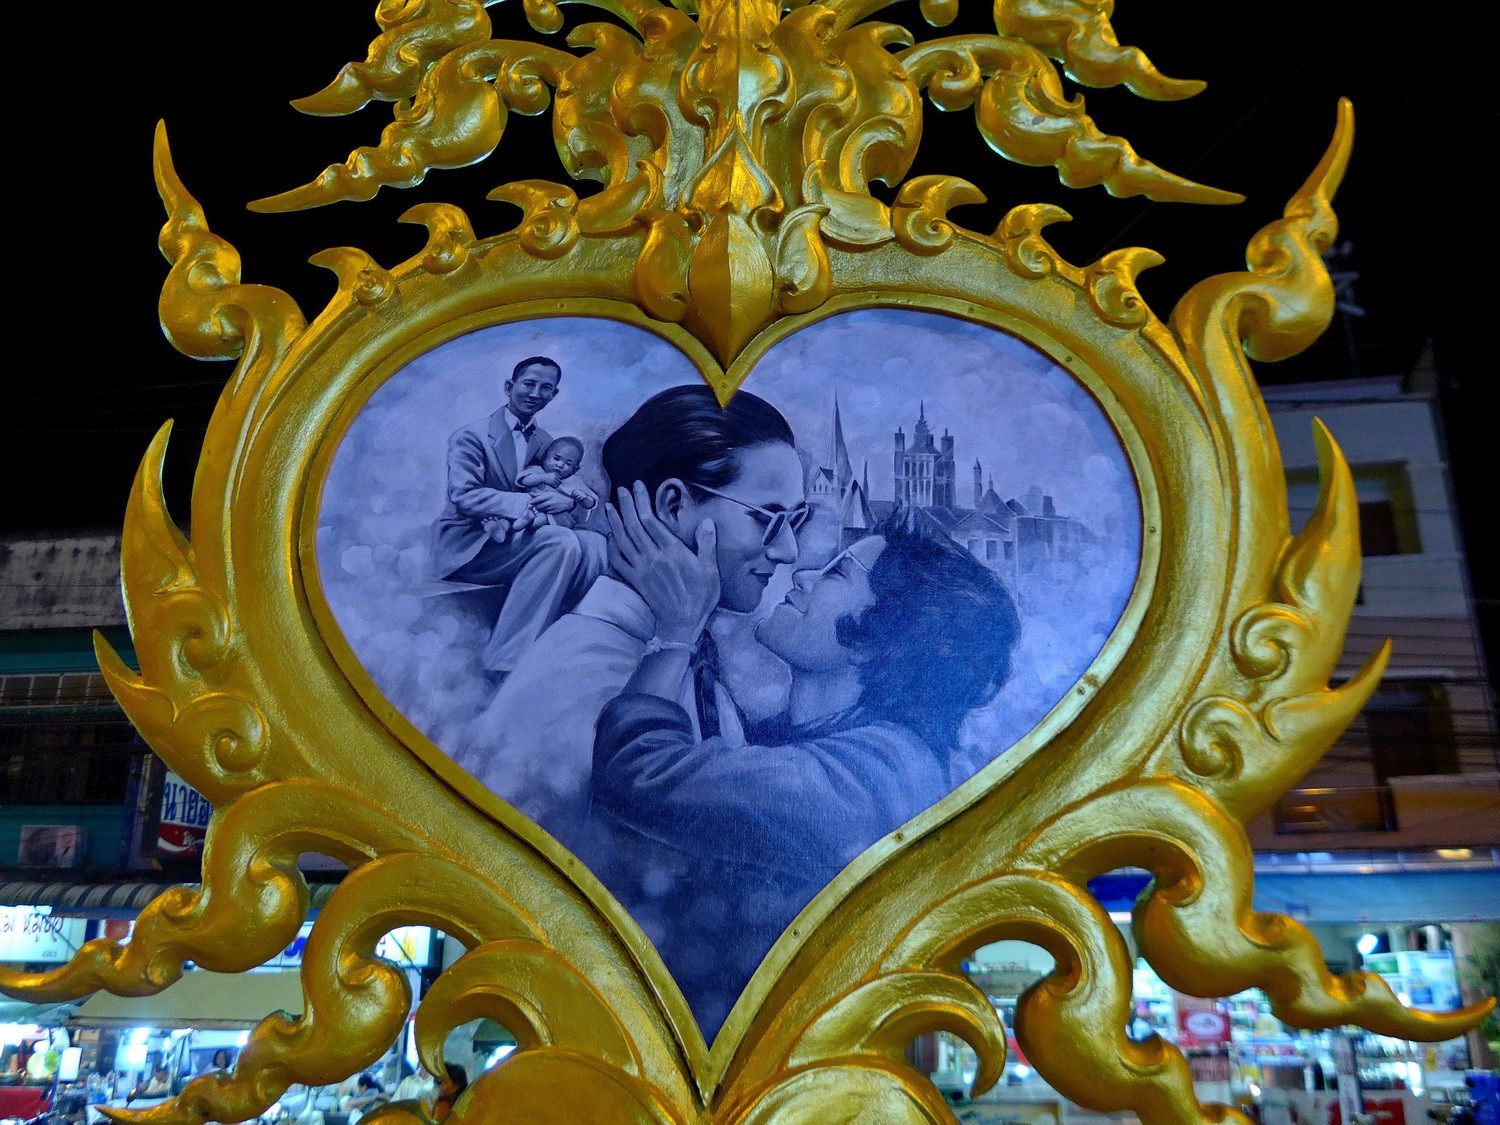 Former king Bhumibol and Queen Sirikit in Love